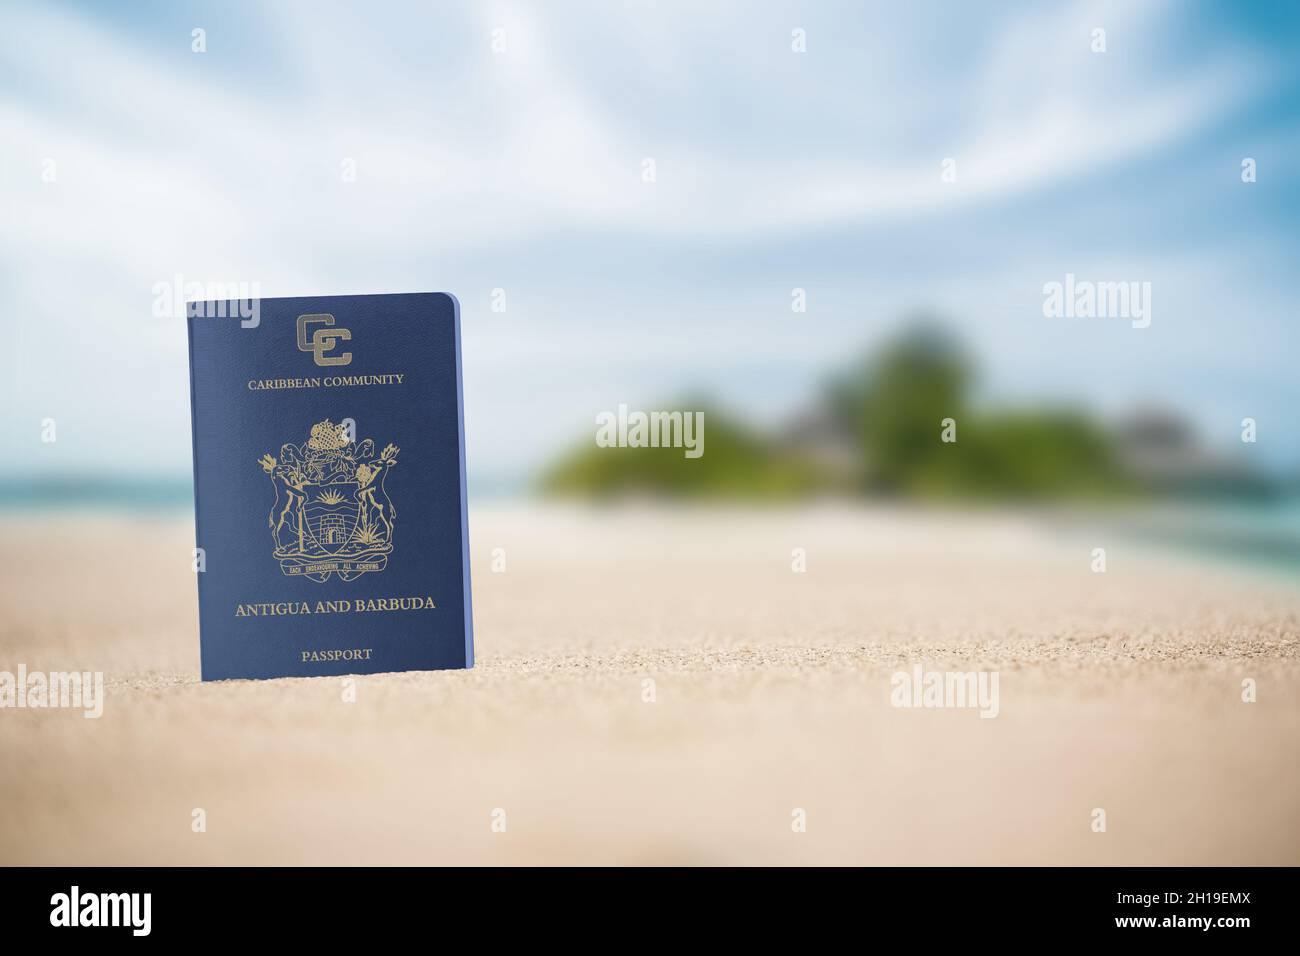 Antigua and Barbuda passport on the beach sand ,Space for writing Stock Photo